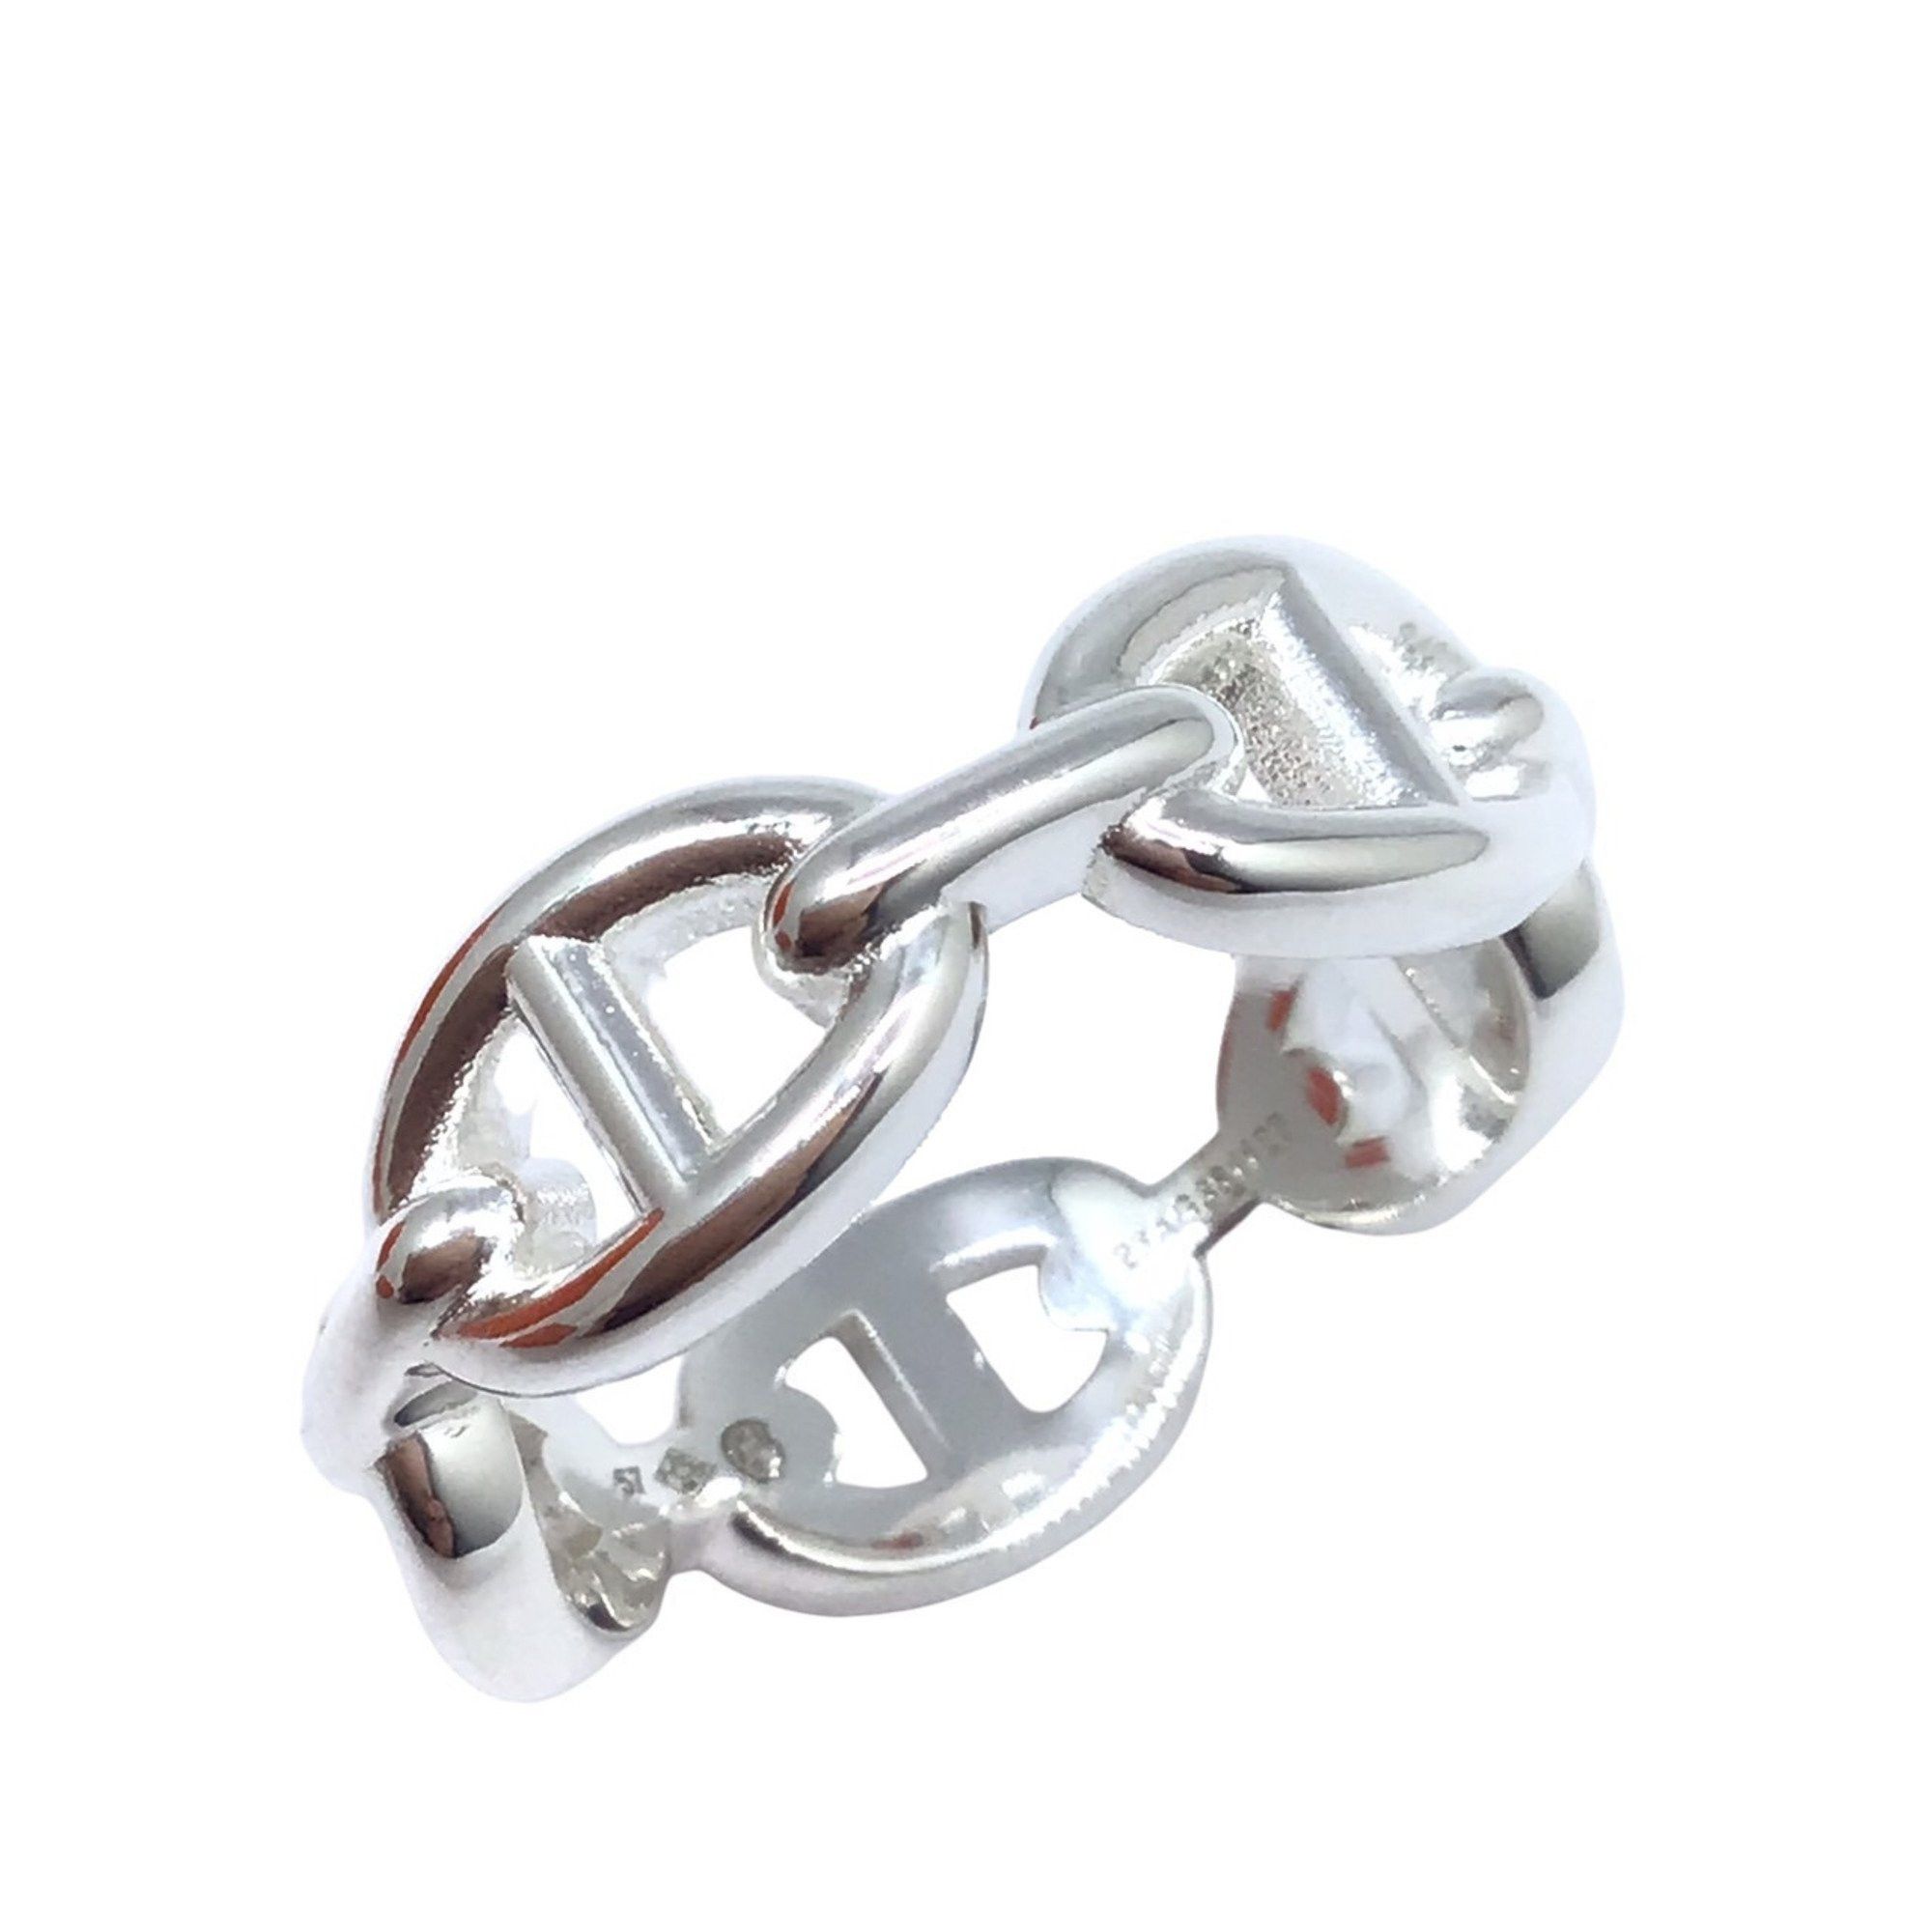 image of Hermes Ancienne Pm 57 Ring Silver Ag925 Sv925 Chaine D'acle Accessory Small Items Women Men Unisex